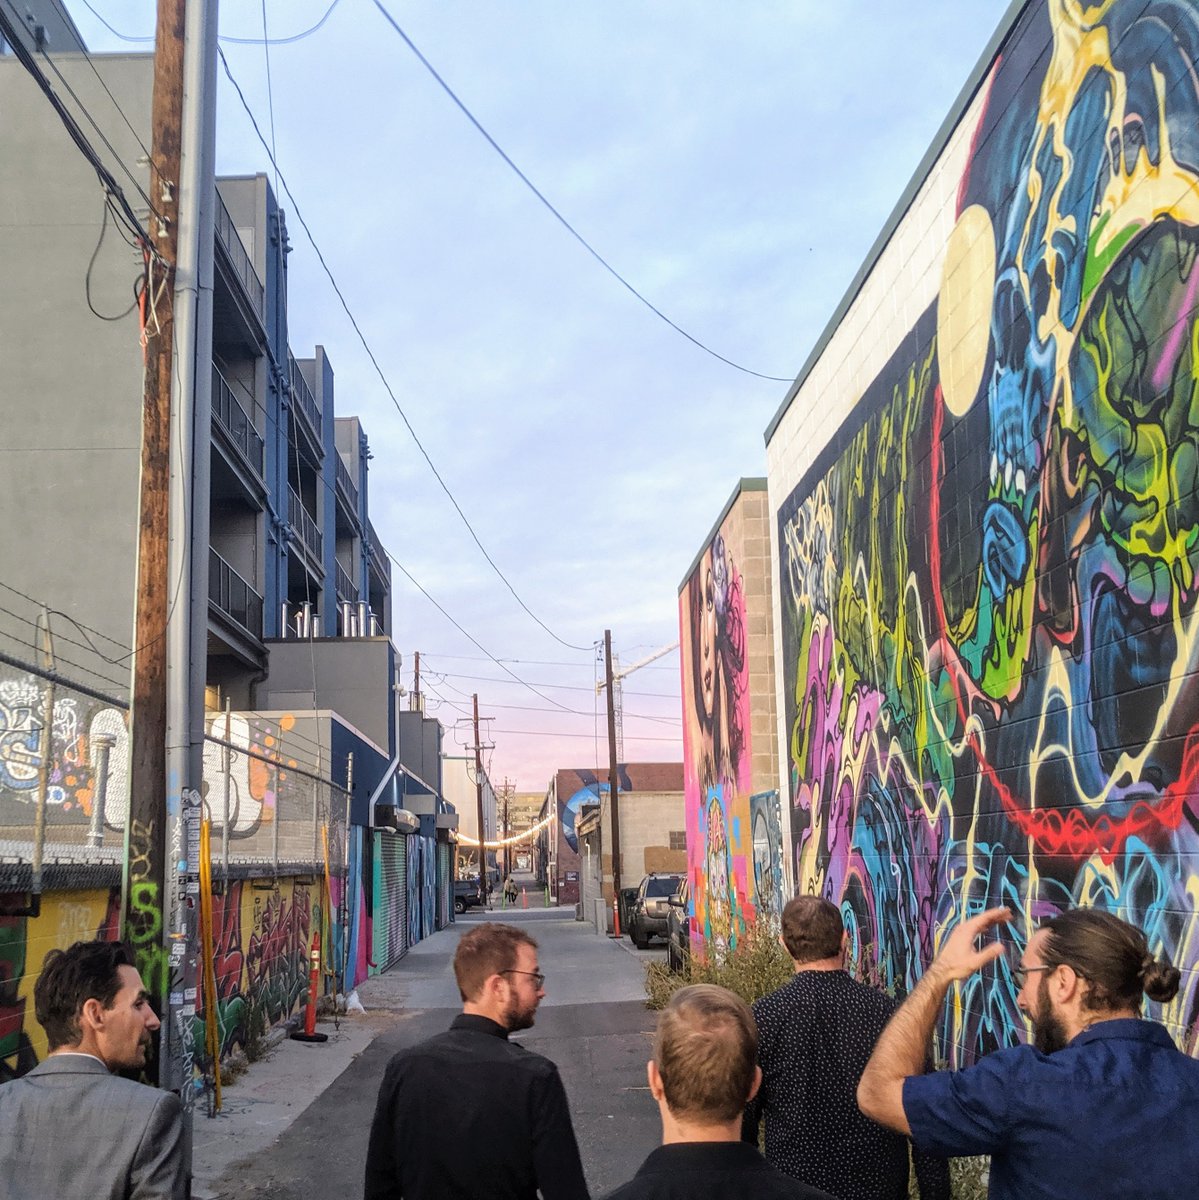 JOURNEY JOURNAL / You're not a real band until you hang out in an alley full of graffiti. What other classic band scenes and memes do you notice?
#classicbandscene #genericbandphoto #musicjournal #denvermusic #rockquintet  #denvercellomusic #cellorock #waltzrock #performanceart